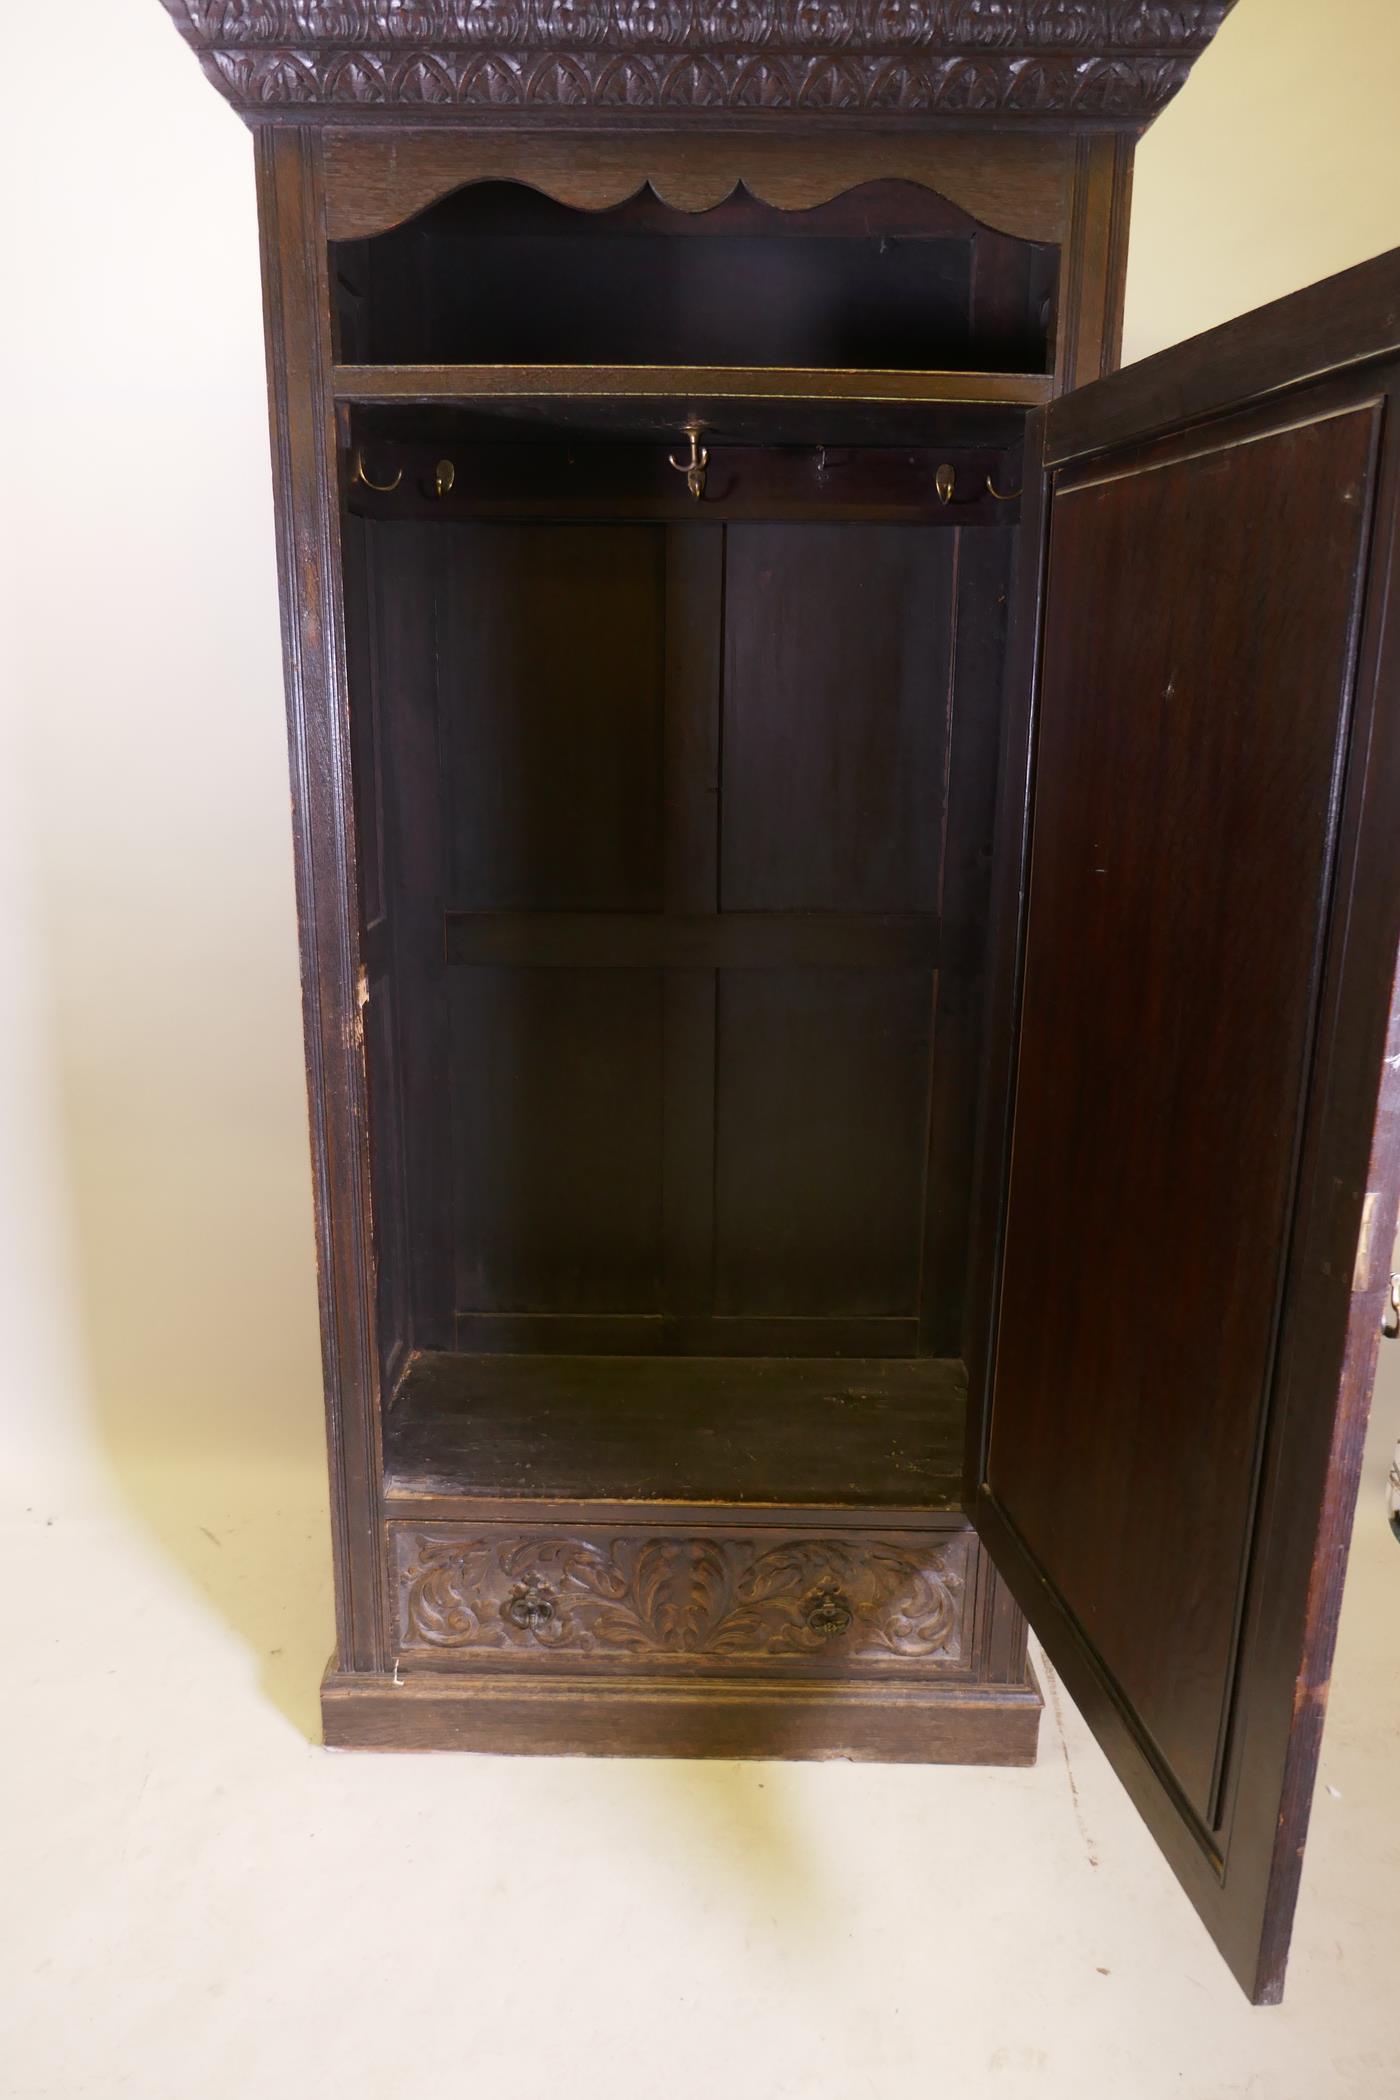 A C19th oak hall cupboard with single door over a drawer and carved decoration in the Renaissance - Image 5 of 6